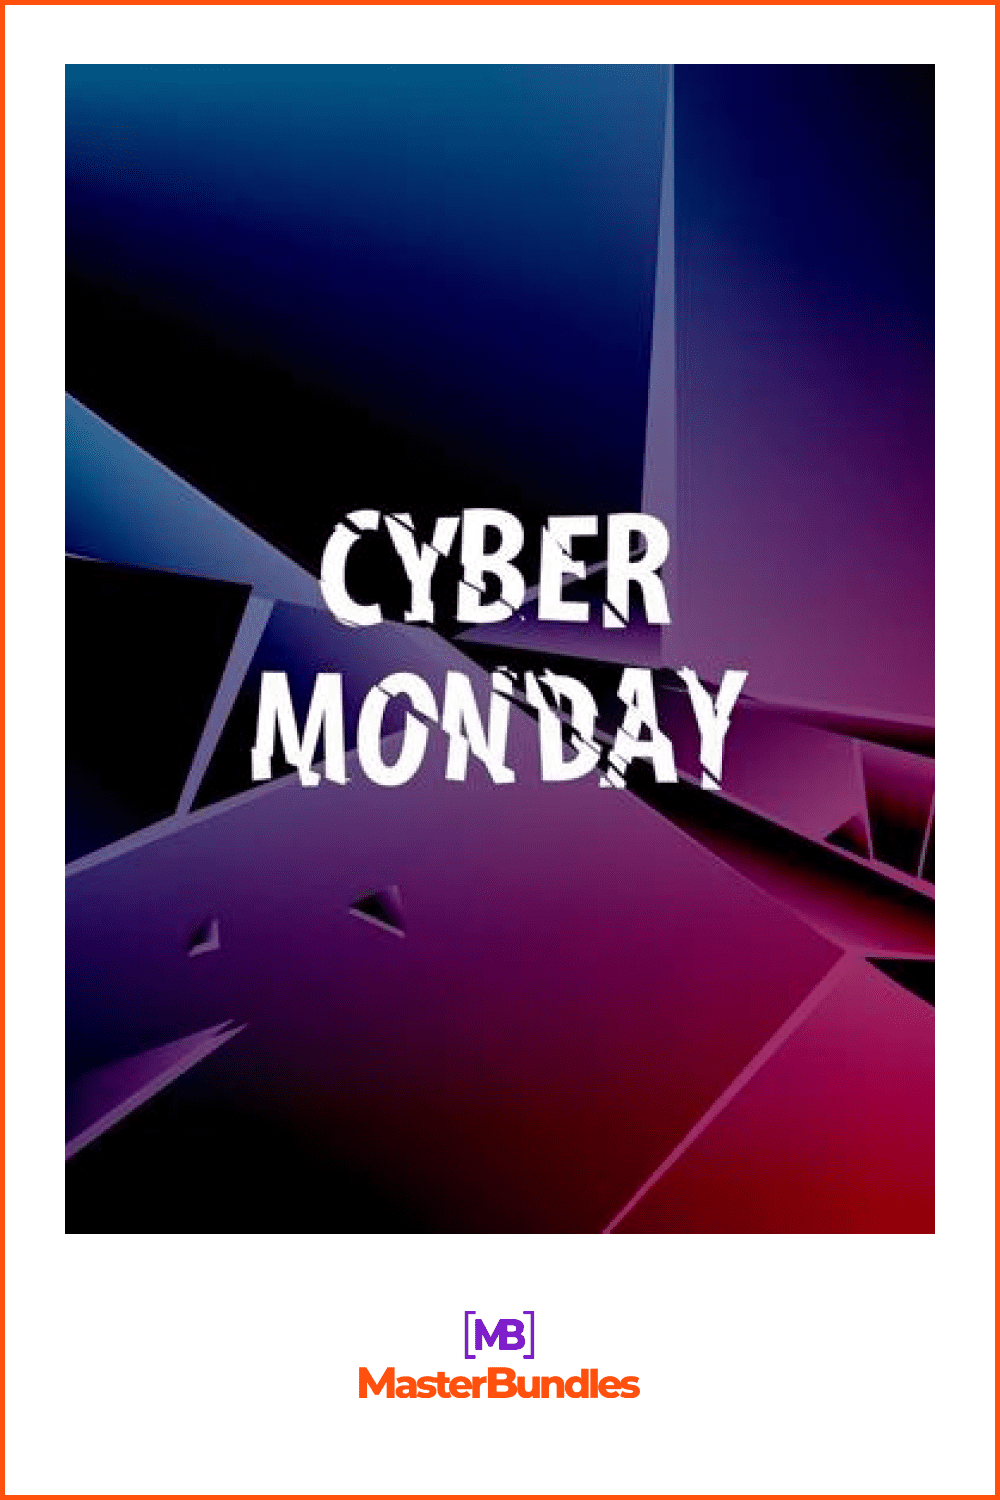 Futuristic Cyber Monday Banner in Dark Blue and Pink Colors.